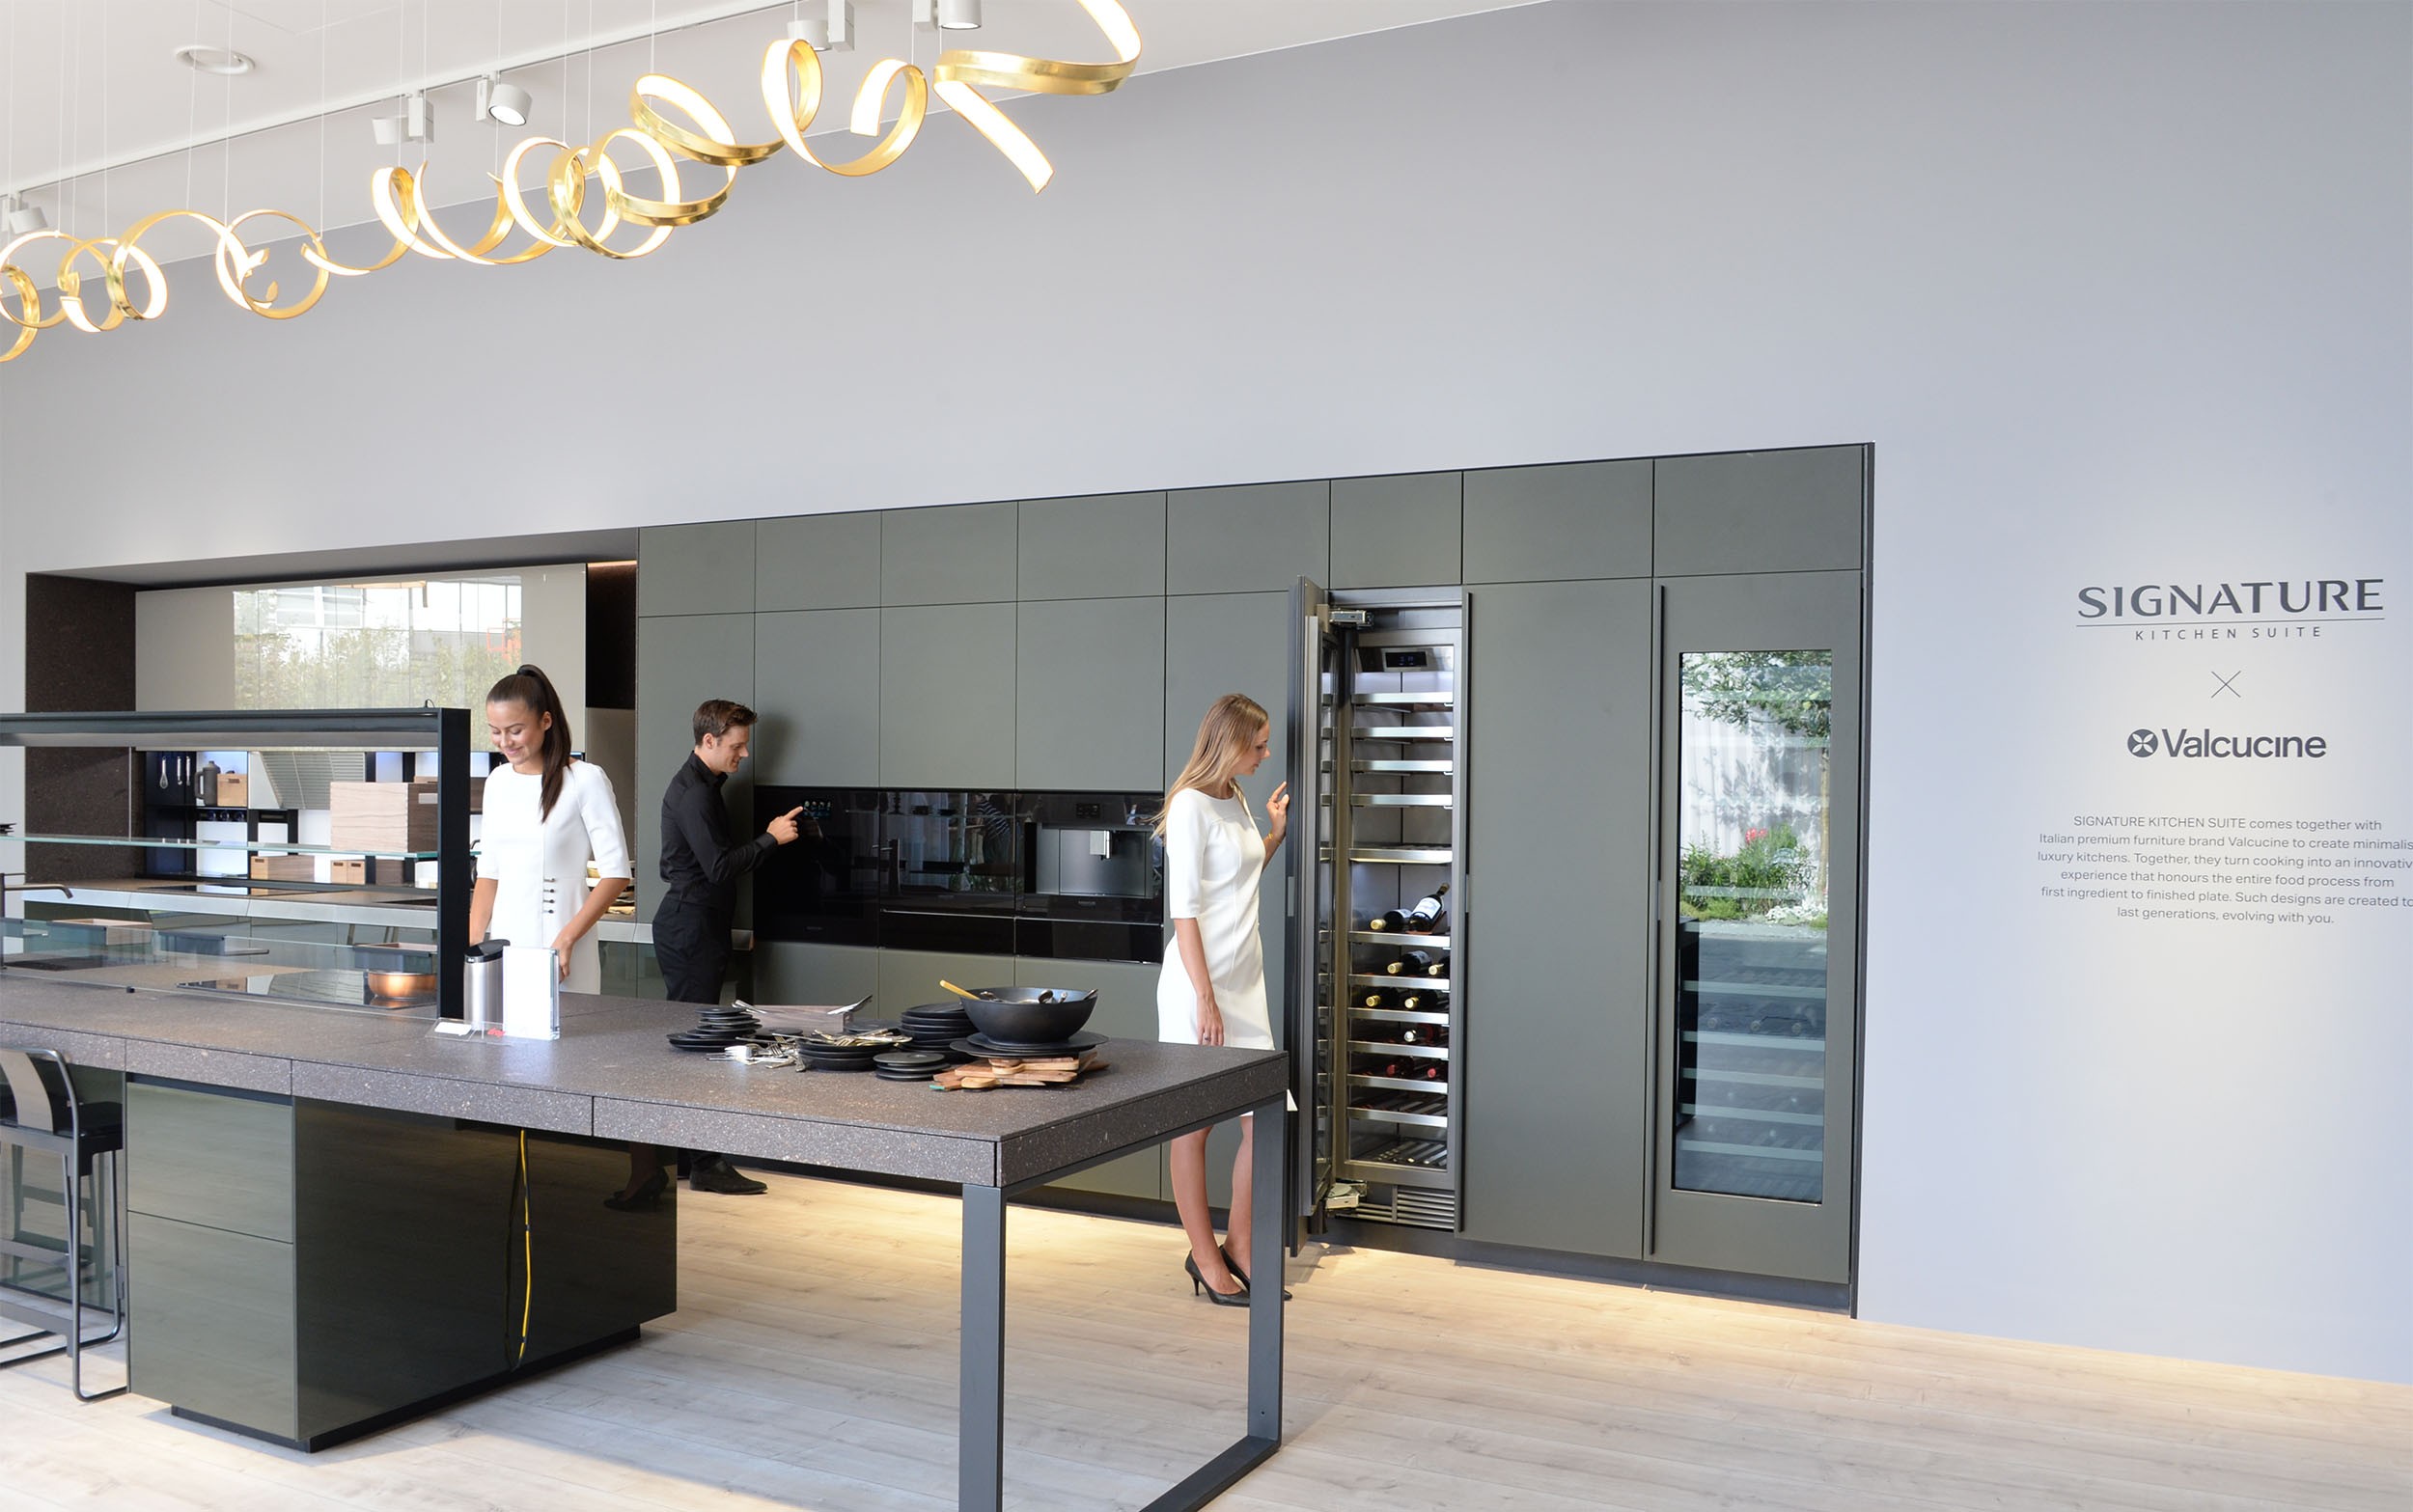 Woman trying cooktop, man trying wall oven and woman opening wine cellar at SIGNATURE KITCHEN SUITE’s exhibition hall cooperated with Valcucine at IFA 2018